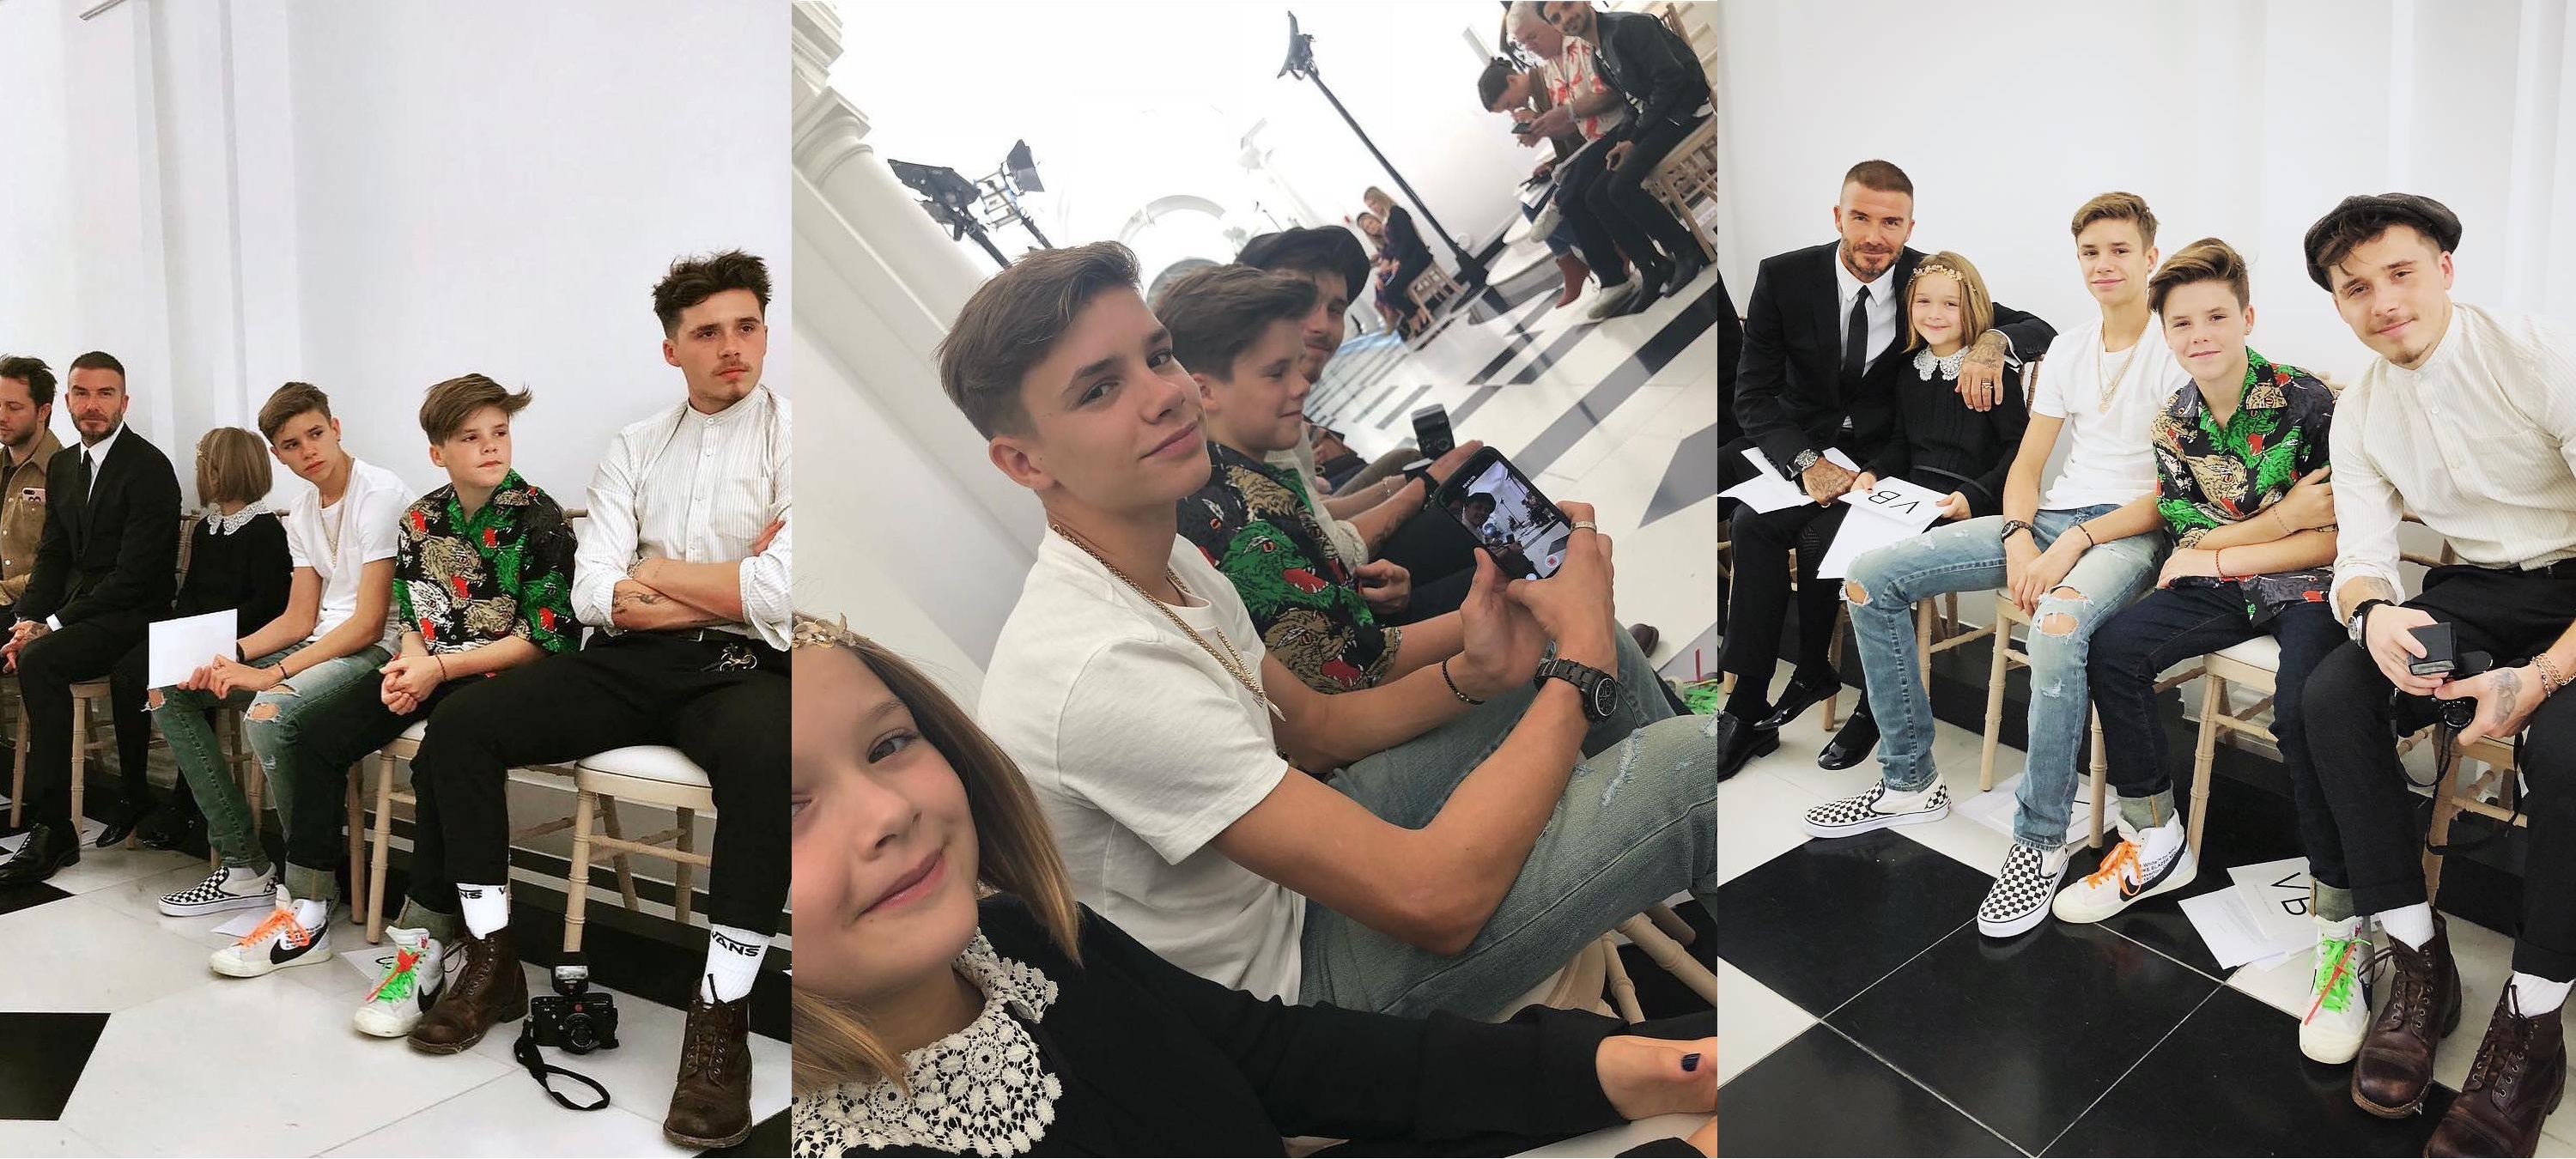 SPOTTED: The Beckham Family Supporting Victoria’s First London Fashion Week Show